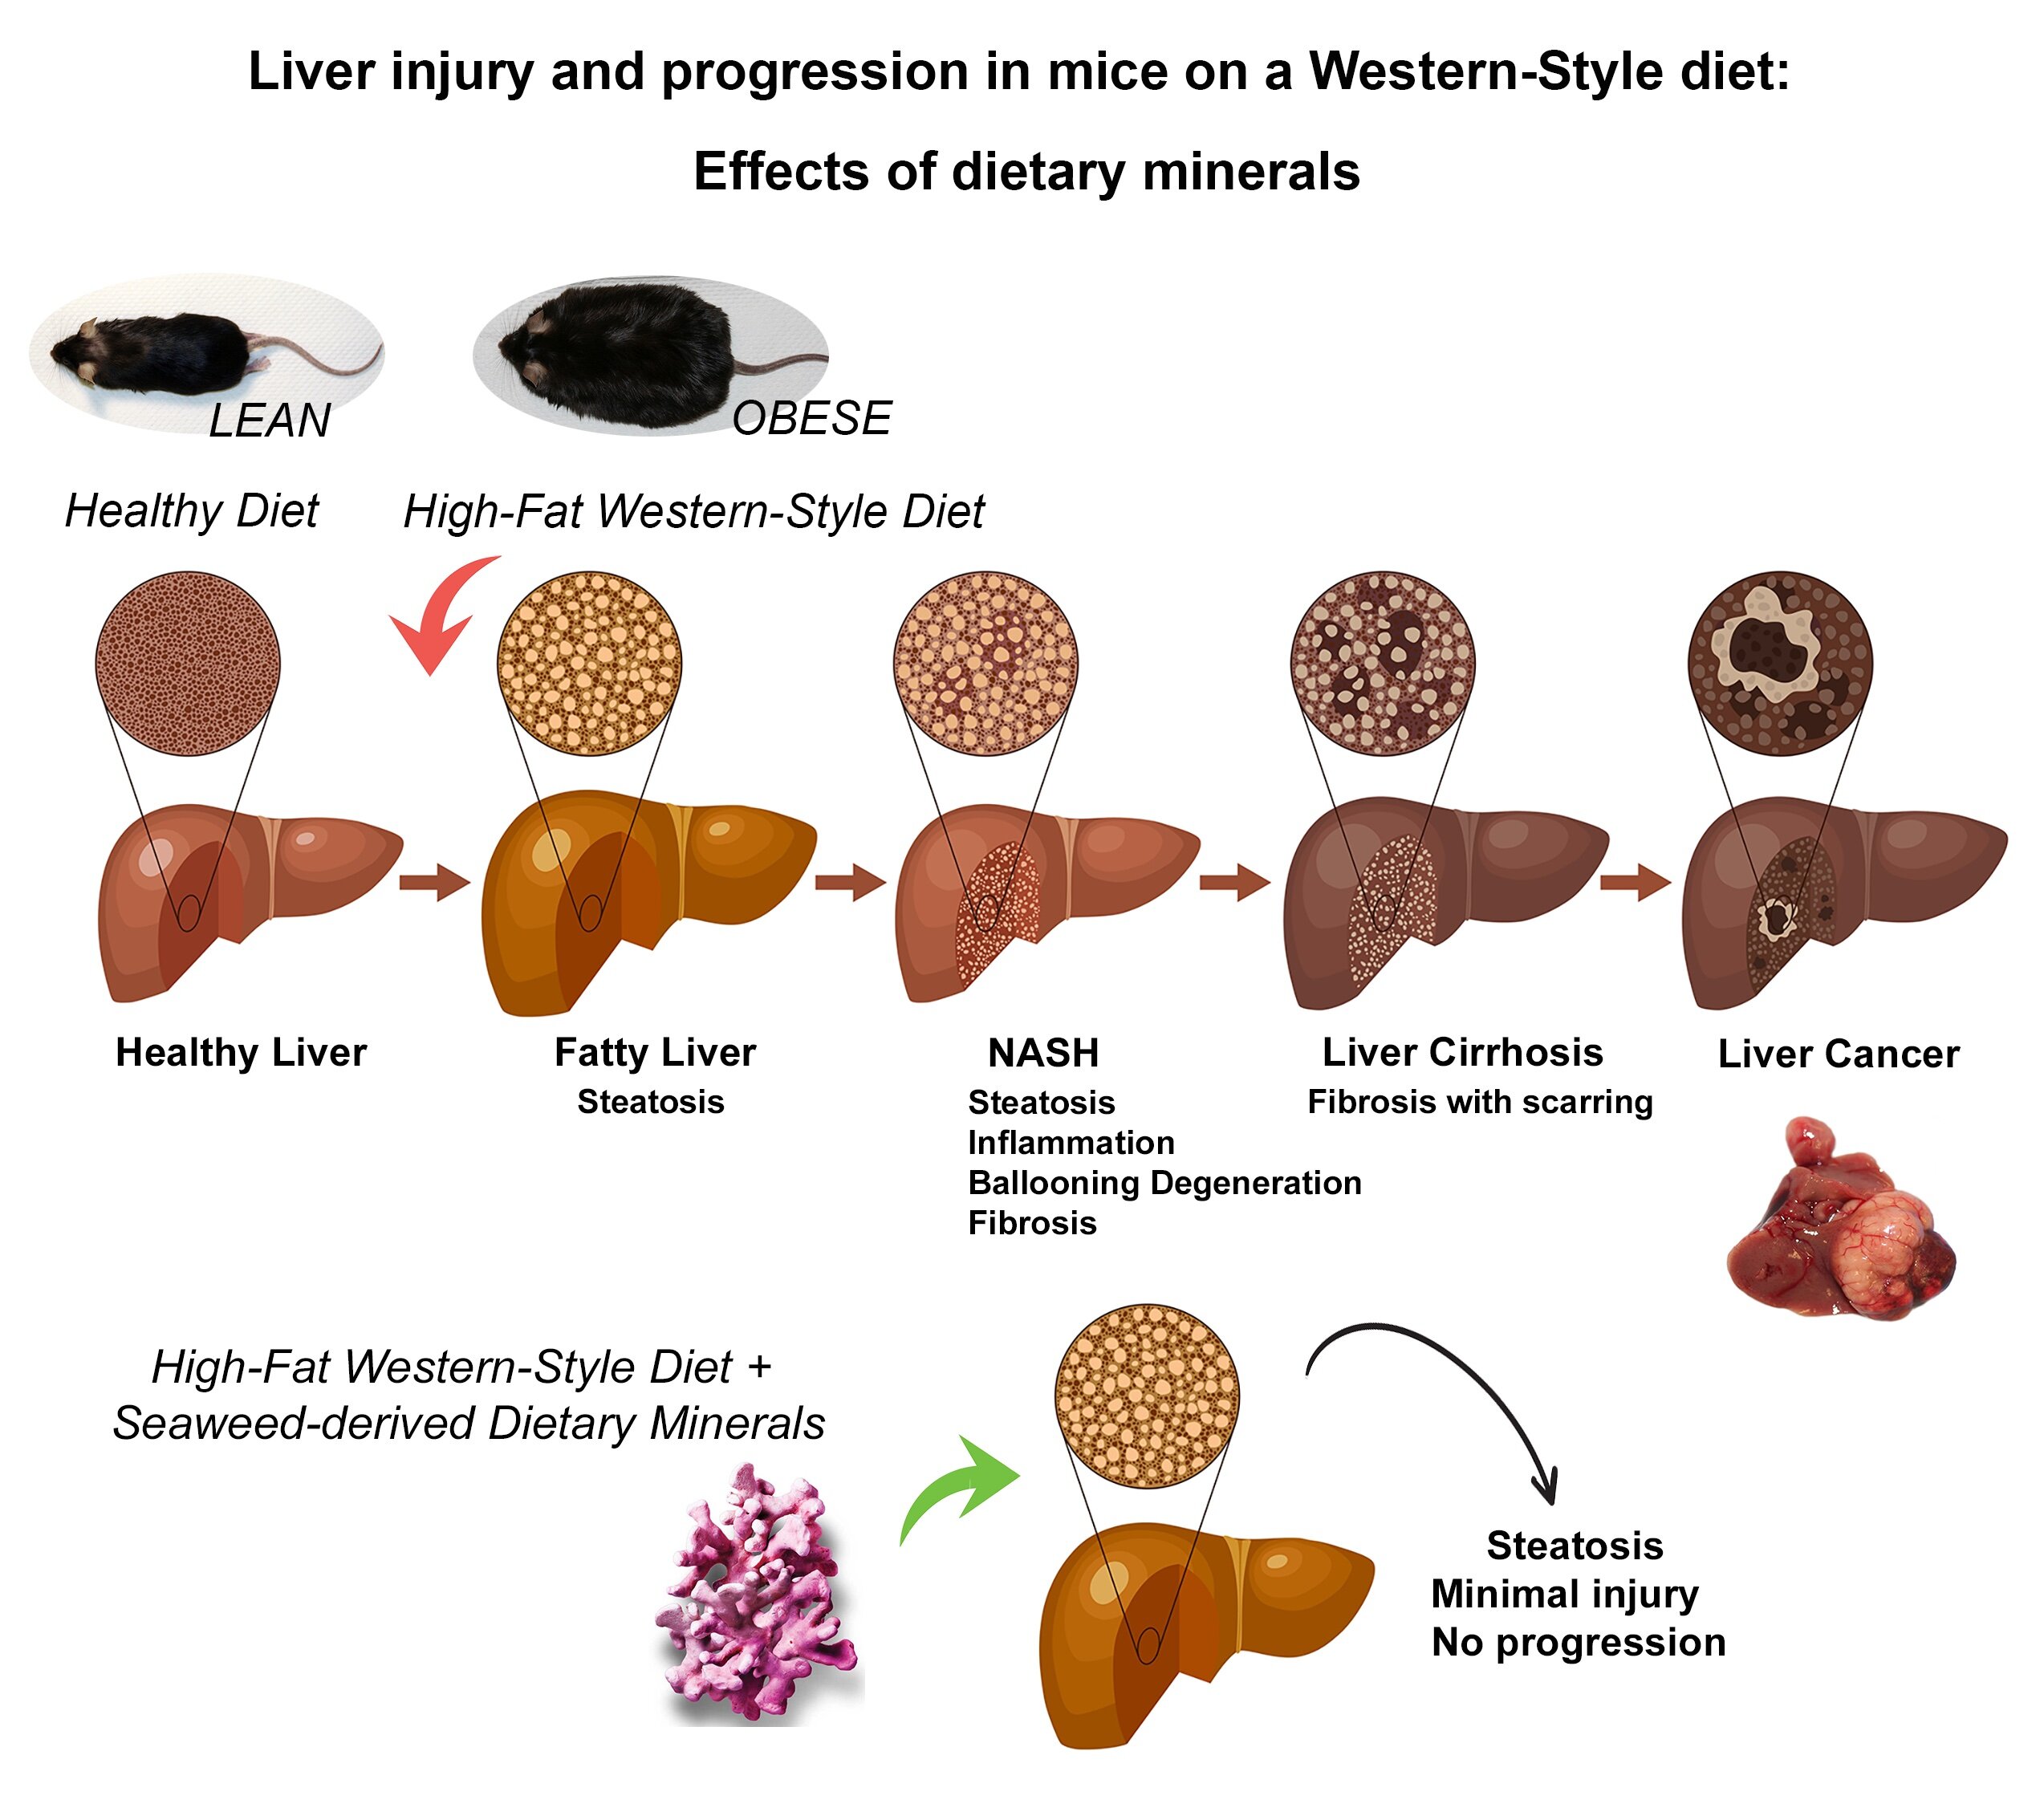 Mineral supplement could stop fatty liver disease progression